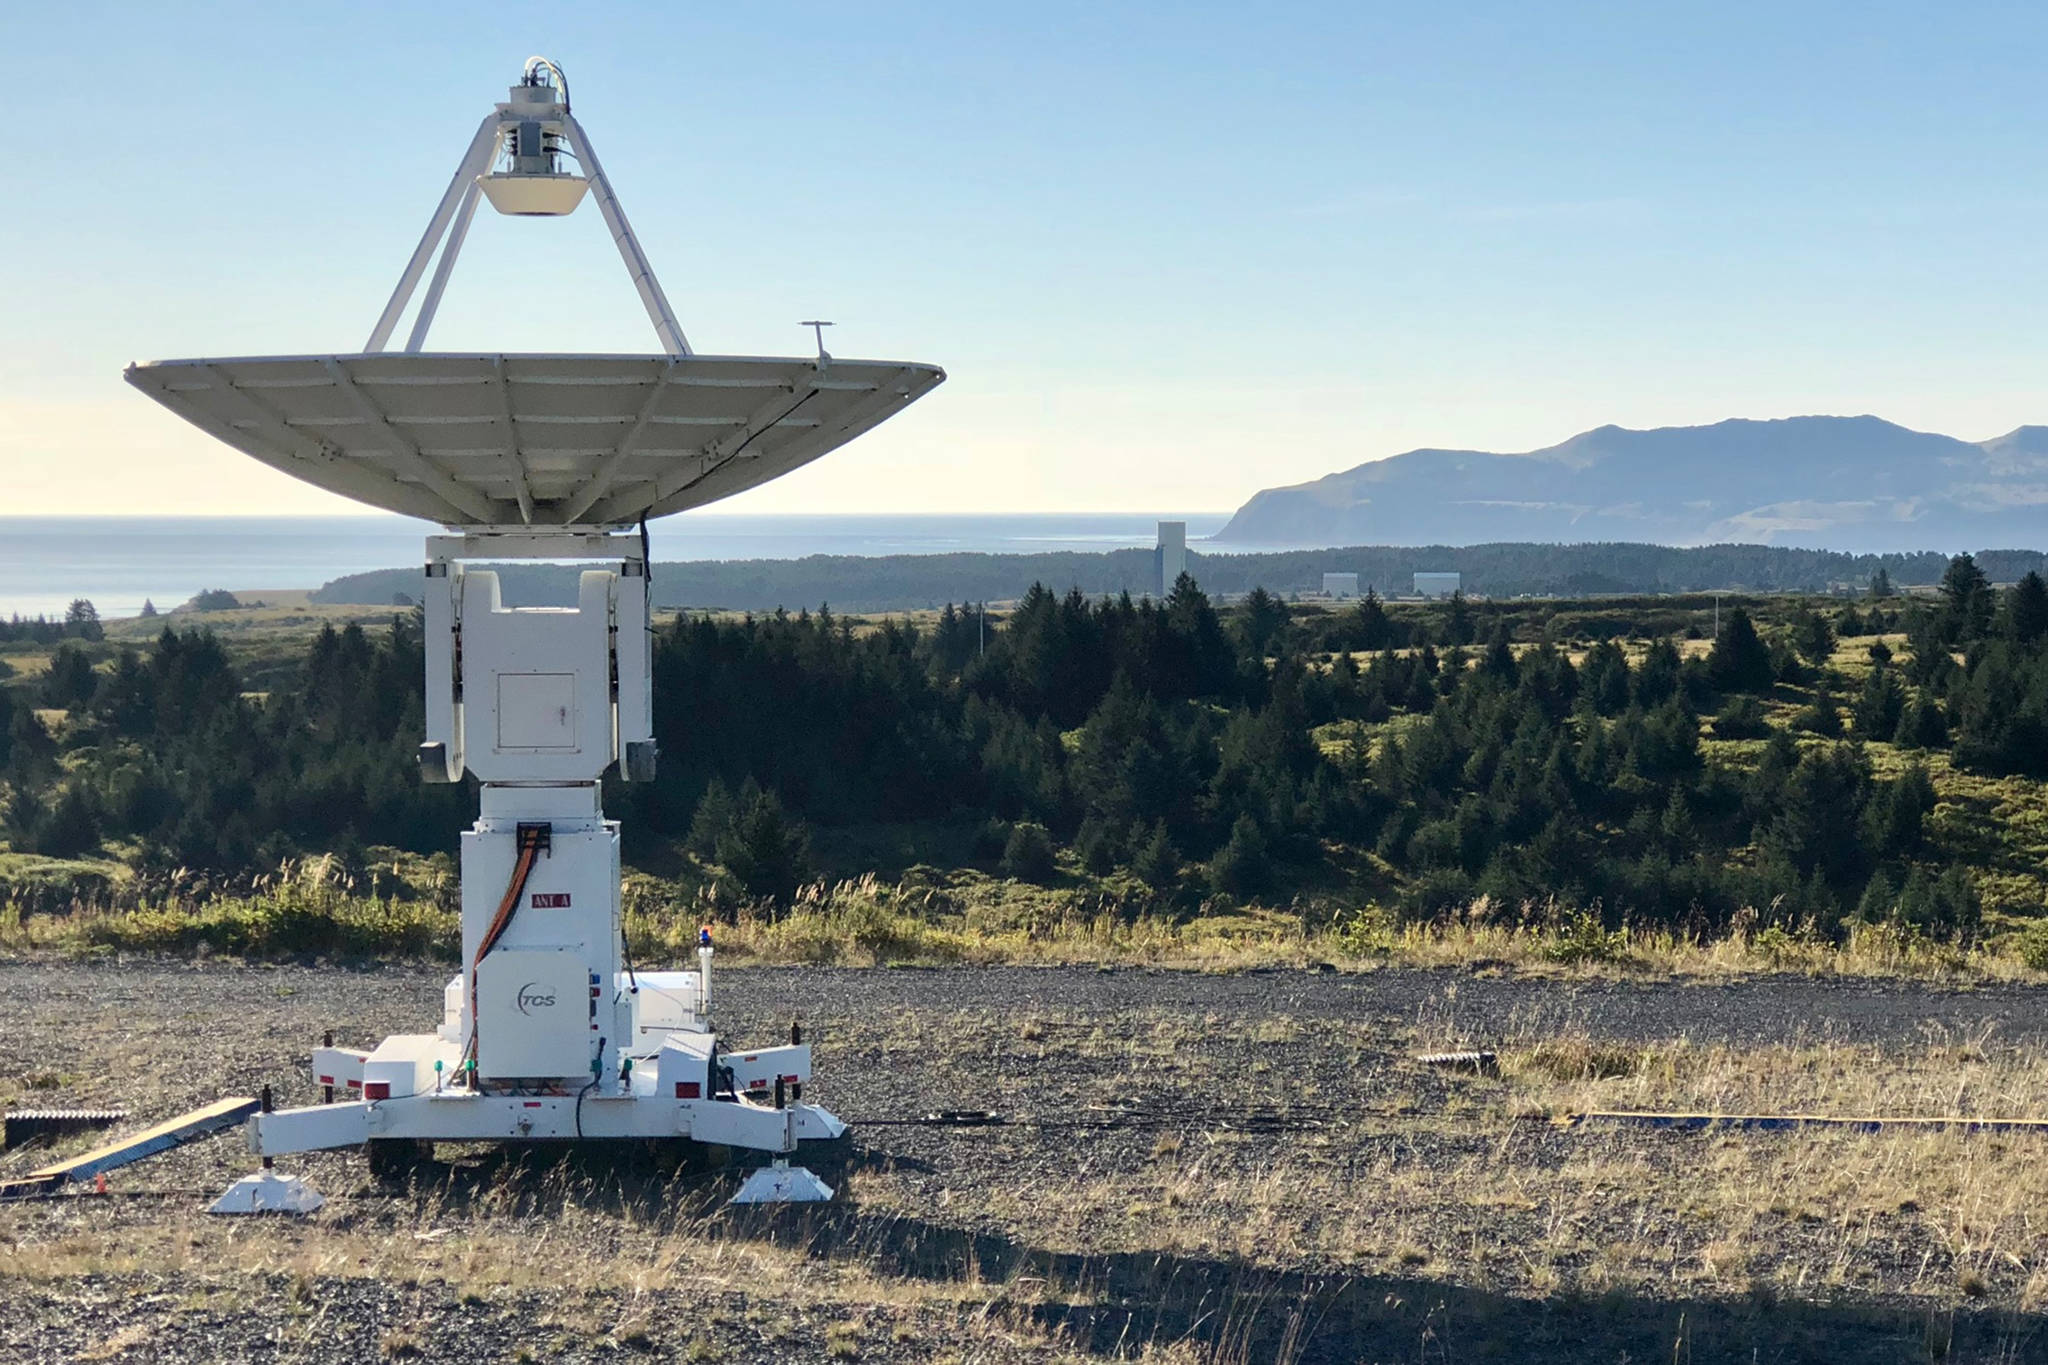 Pending an environmental assessment more launches could happen at the Pacific Spaceport Complex - Alaska. (Courtesy Photo | Alaska Aerospace Corporation)